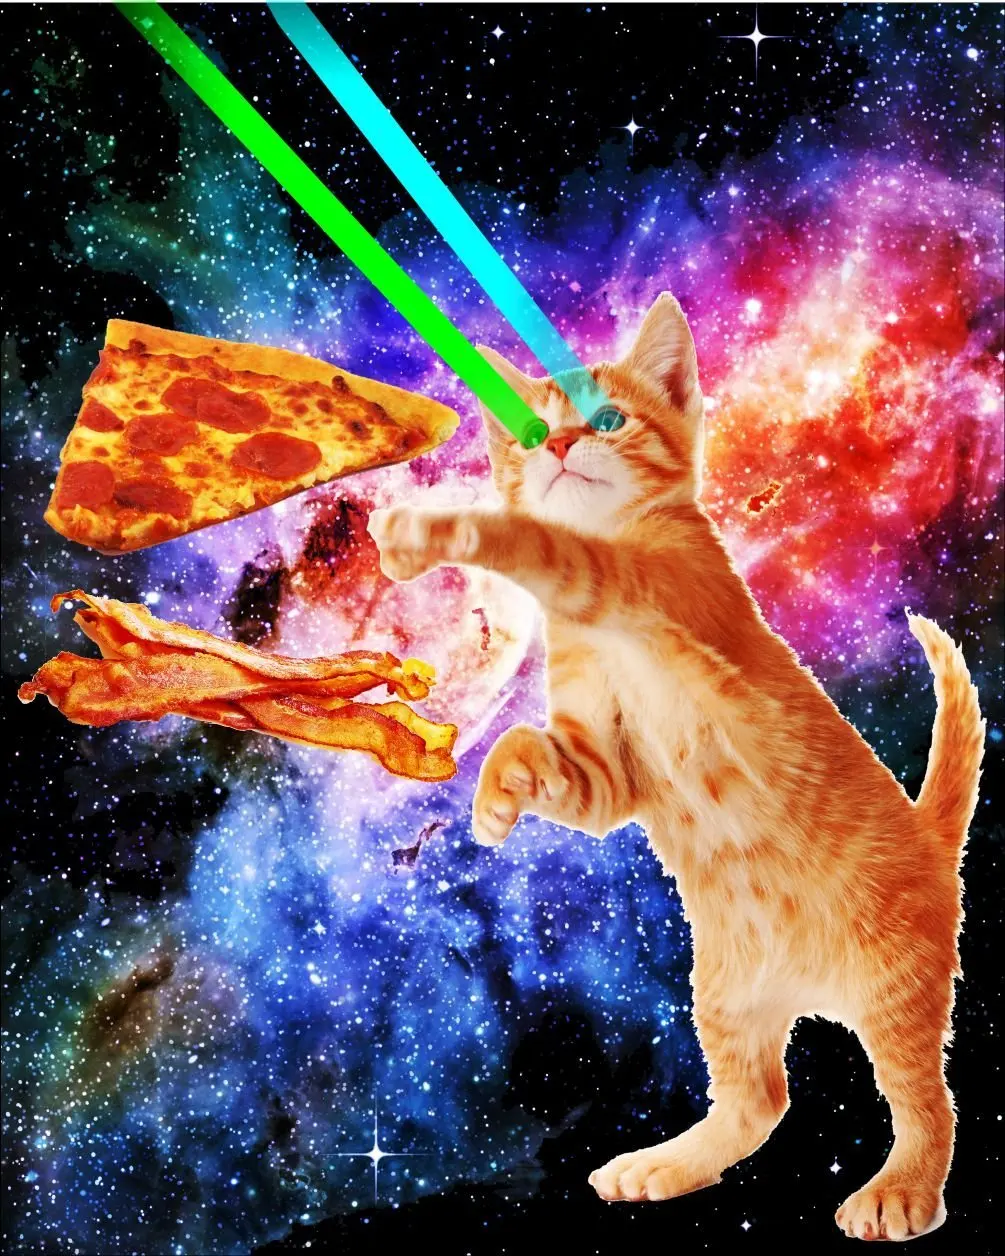 11.99. Space Hunger Flying Cat Pizza Bacon Poster. 